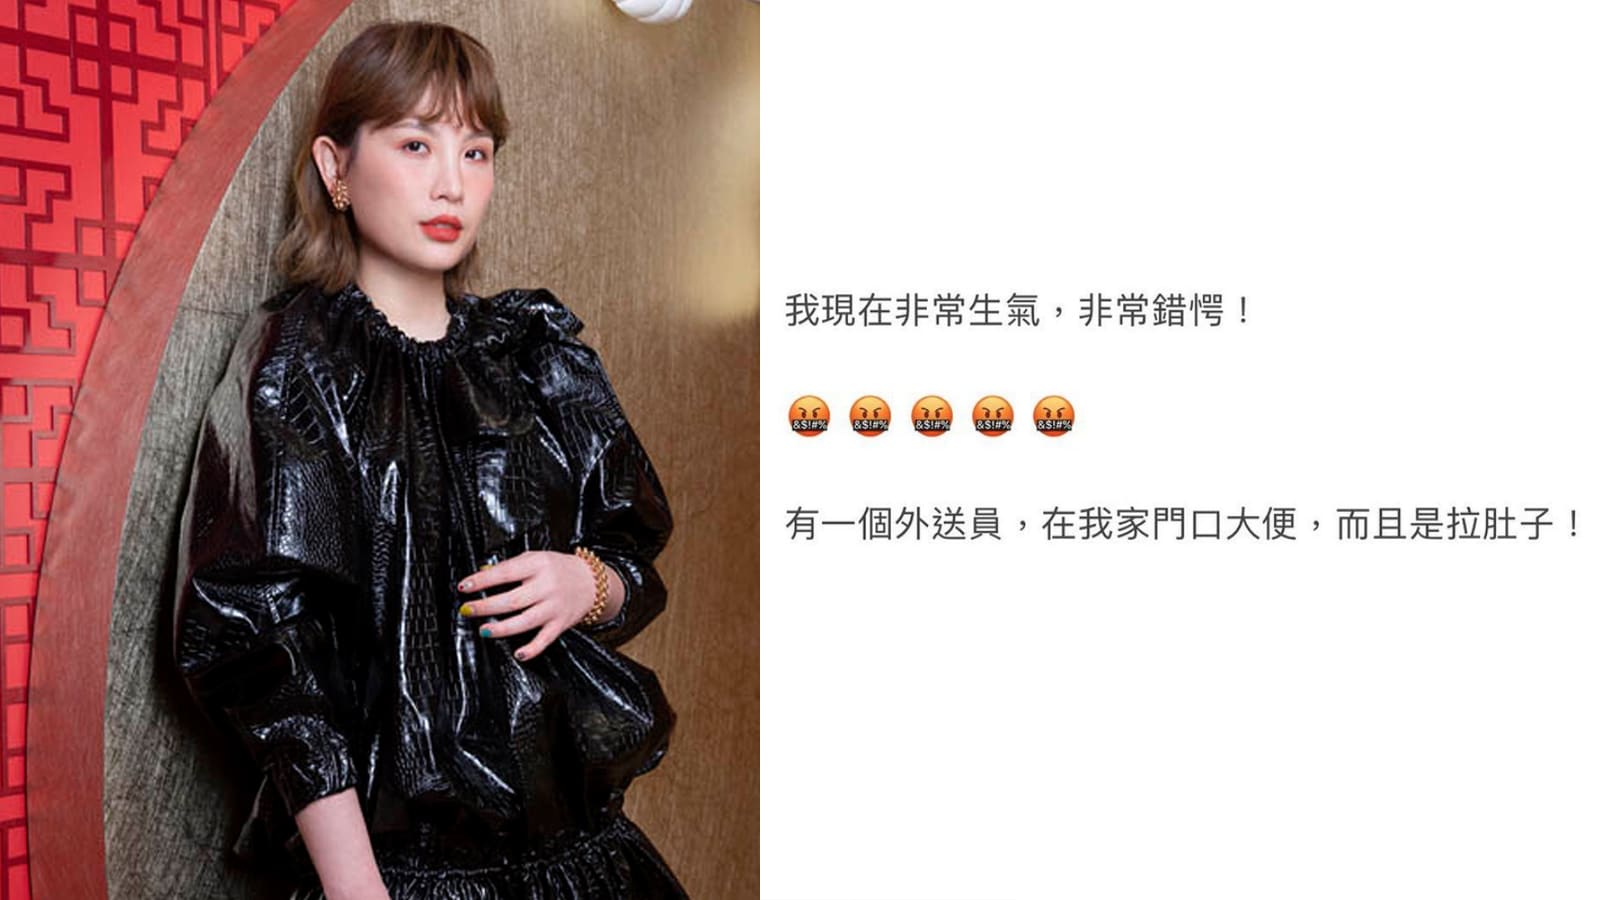 A Deliveryman Had Explosive Diarrhea On Taiwanese Singer Waa Wei’s Doorstep; Left It For Her To Clean Up